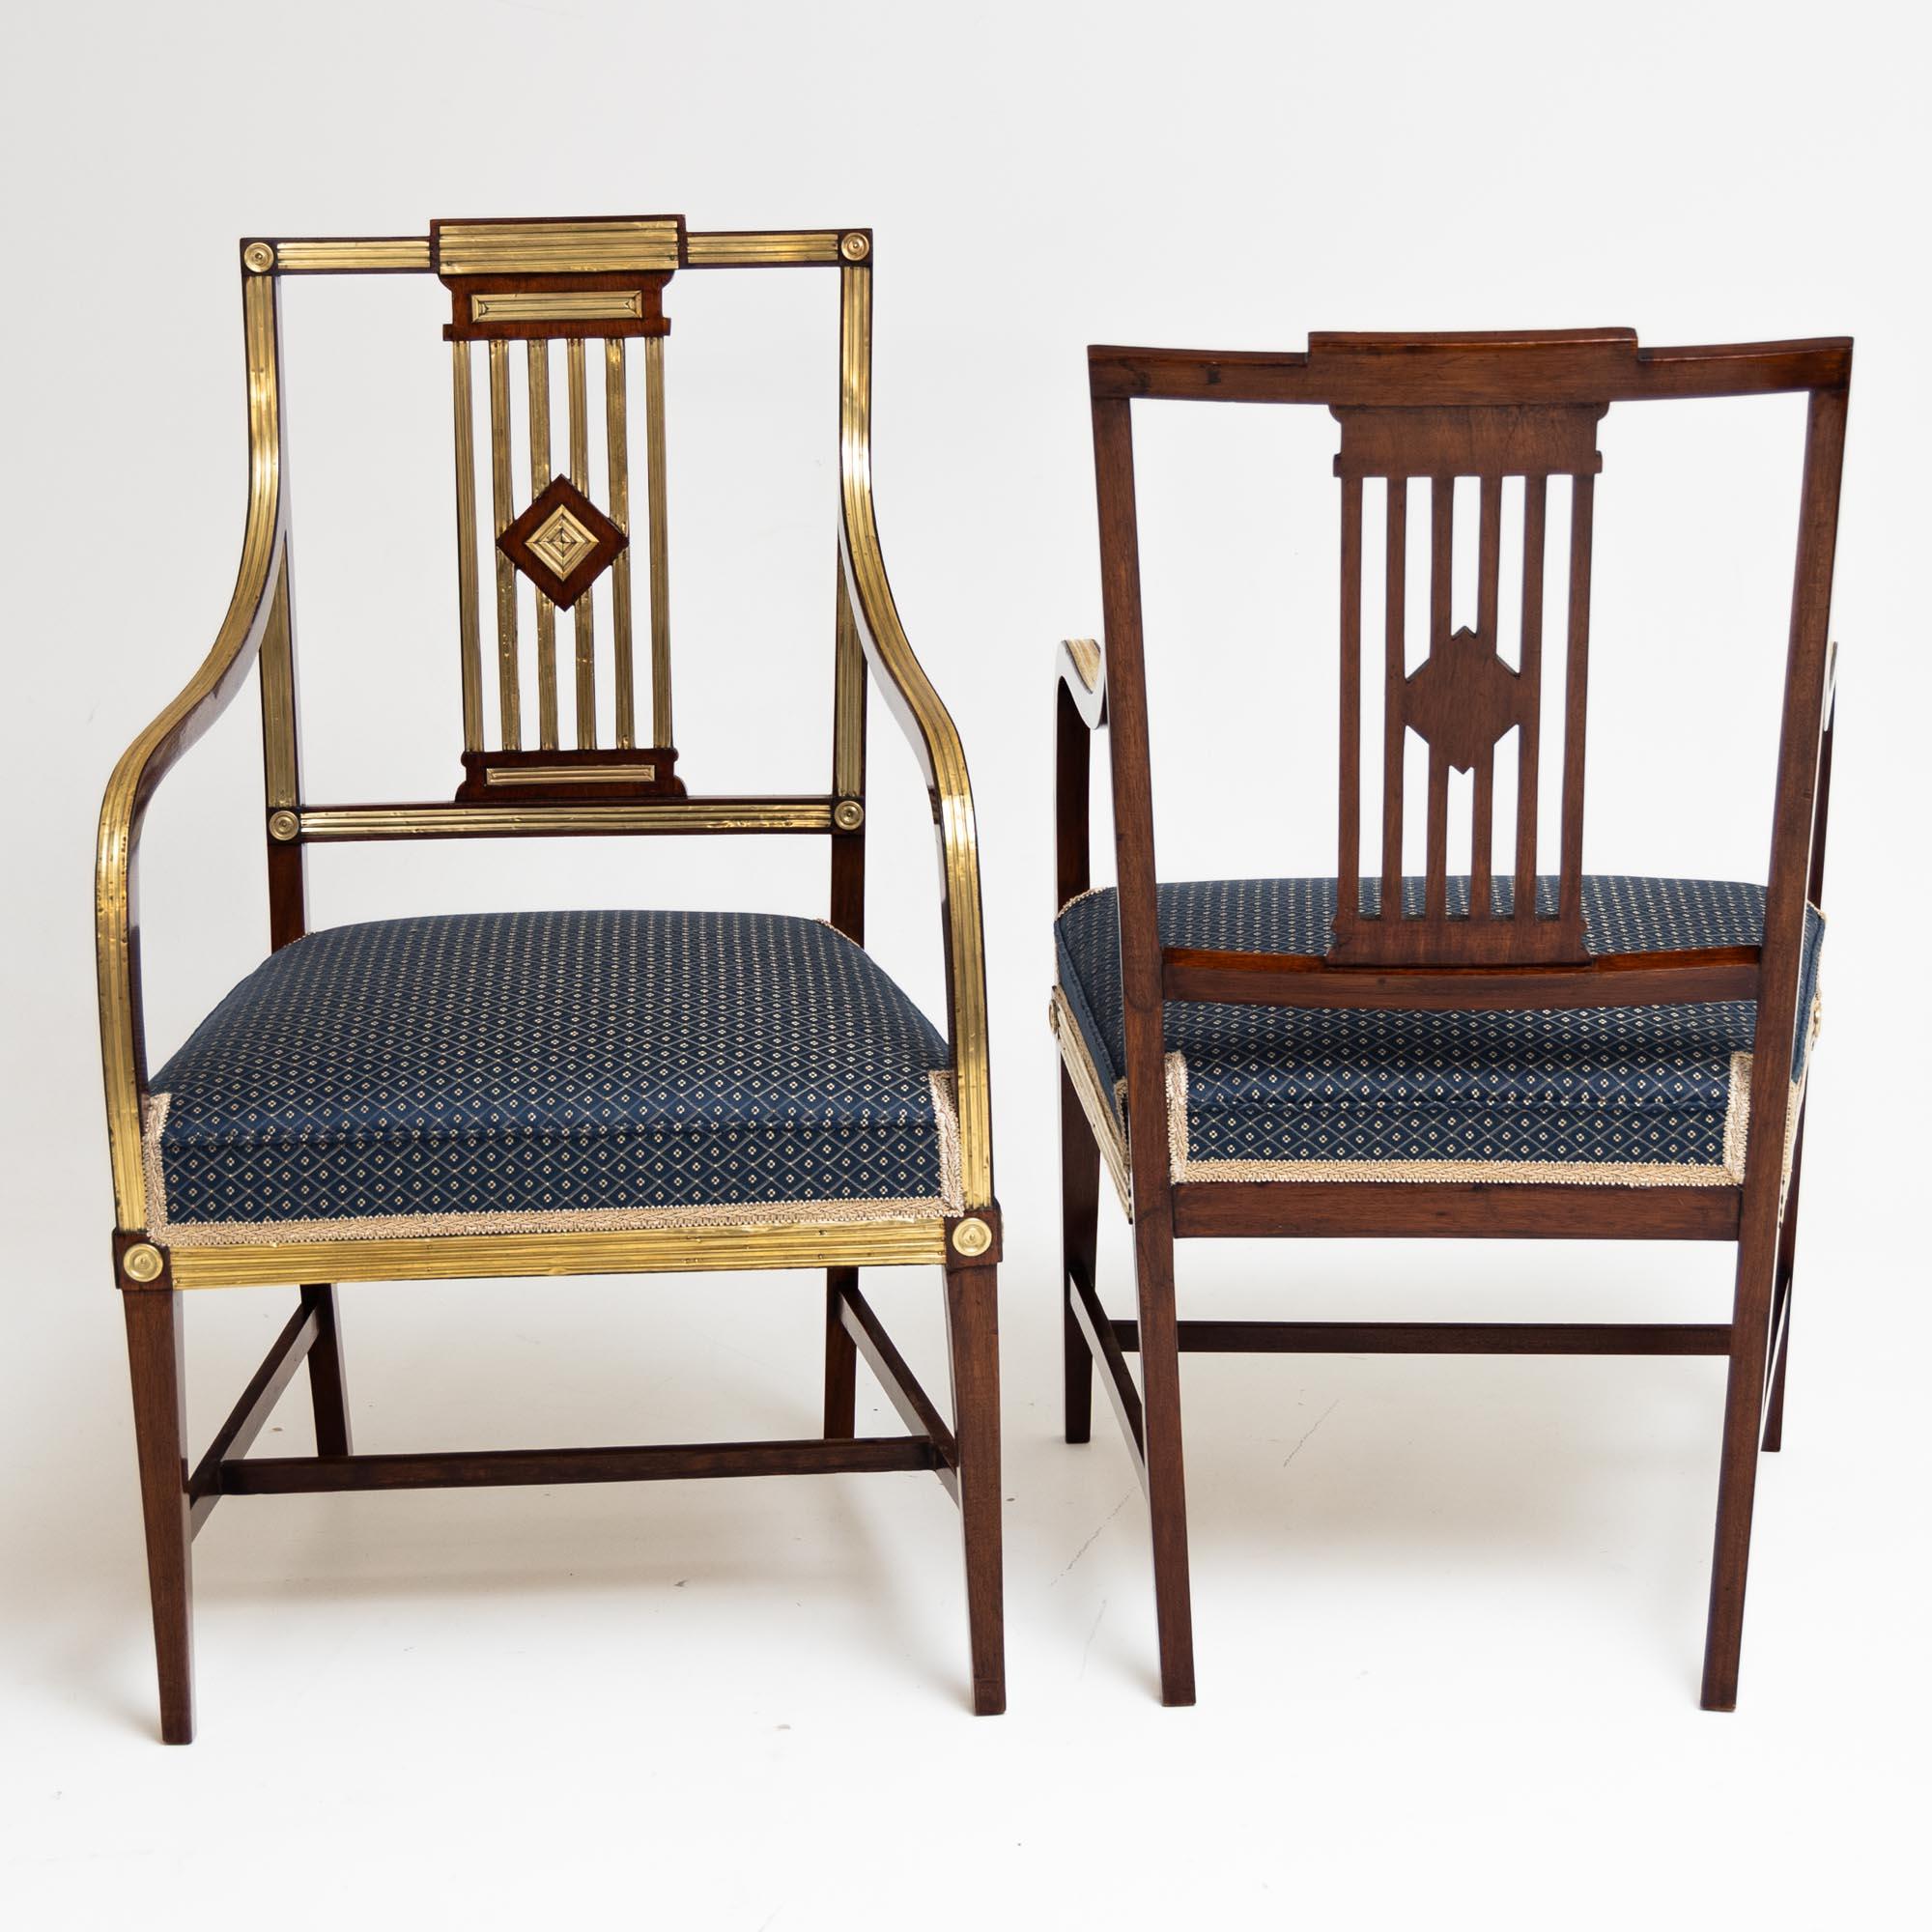 Pair of Neoclassical Dining Room Chairs, Brass, Baltic States, Late 18th Century For Sale 4